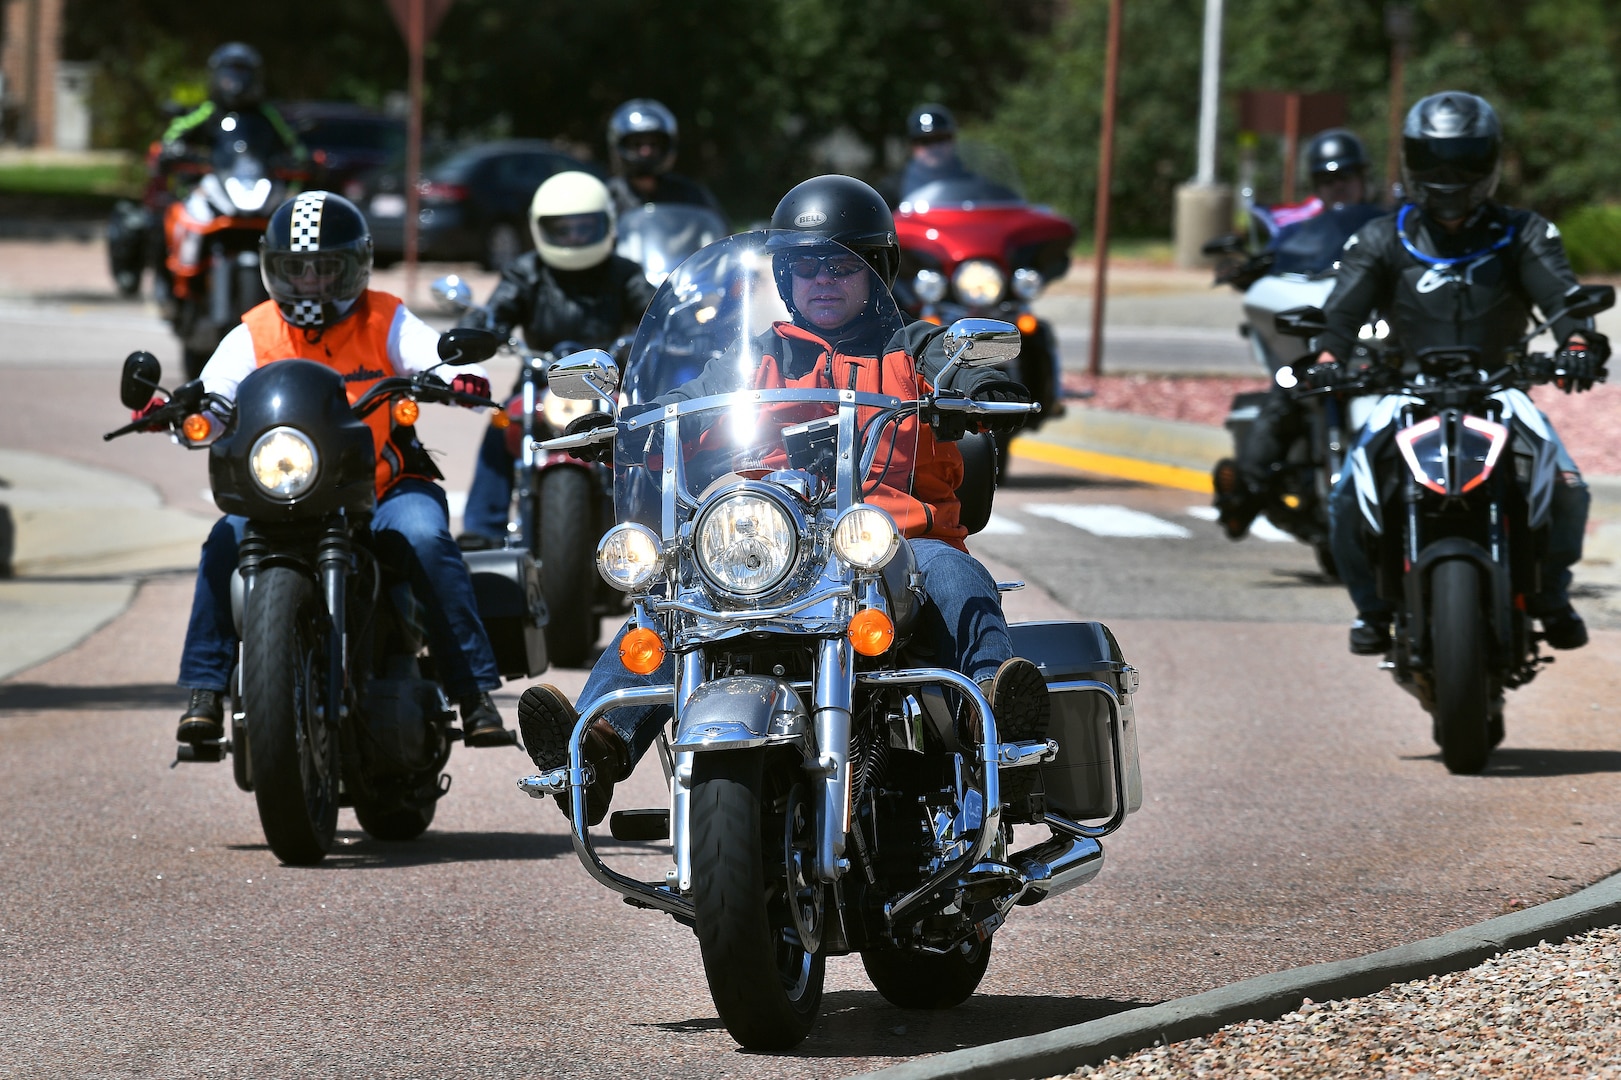 Group of motorcyclists riding